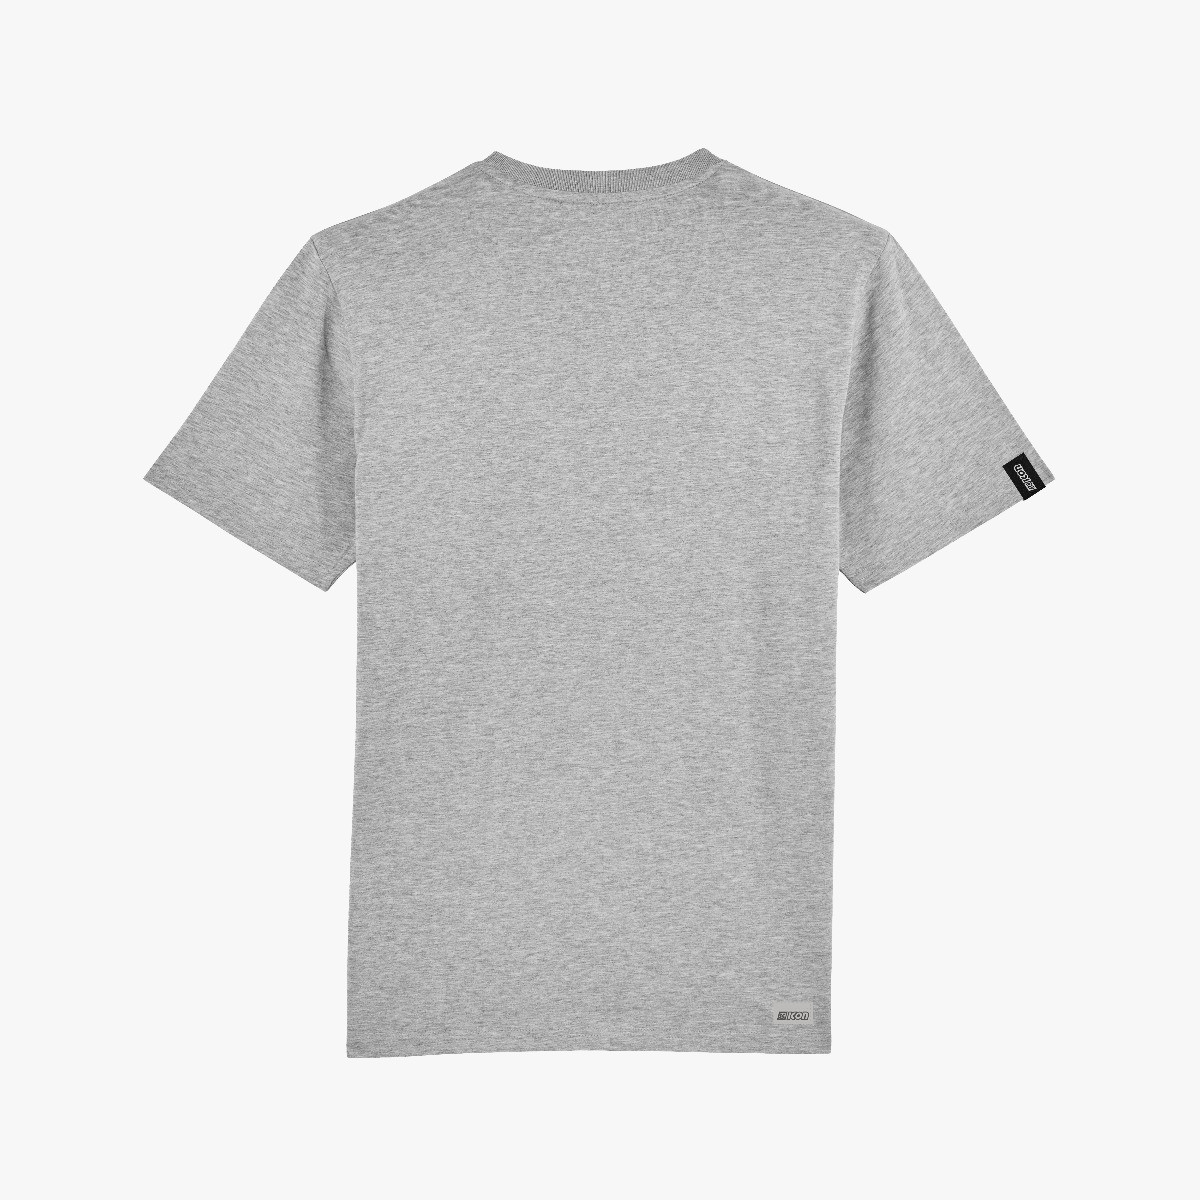 sciconsports t-shirt grey ts61884